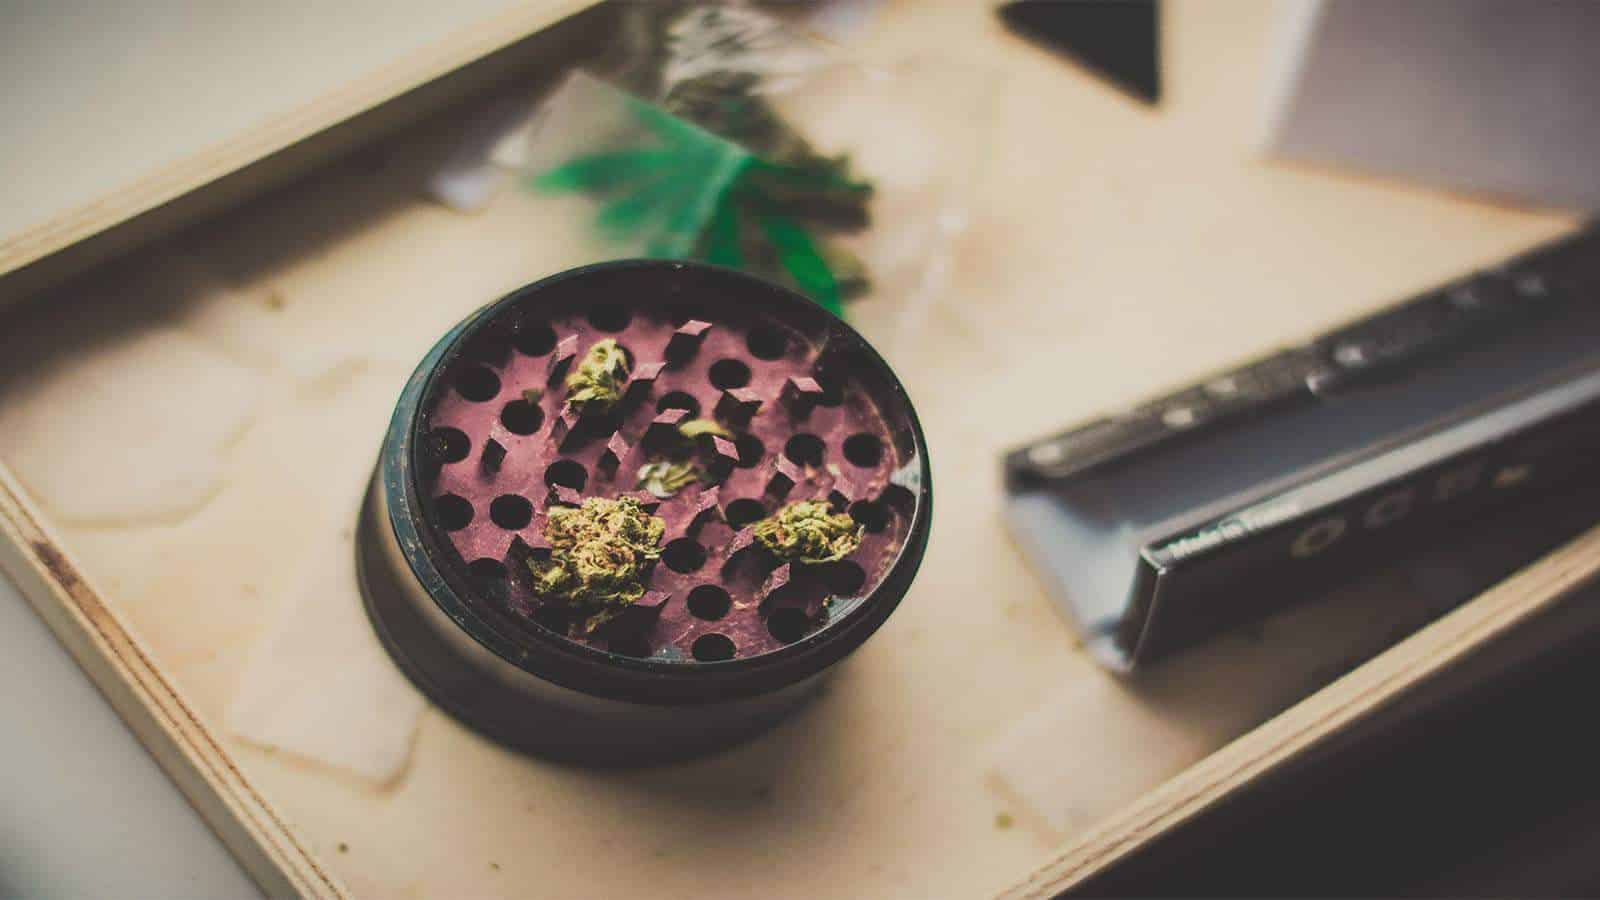 Photo of bud in a grinder